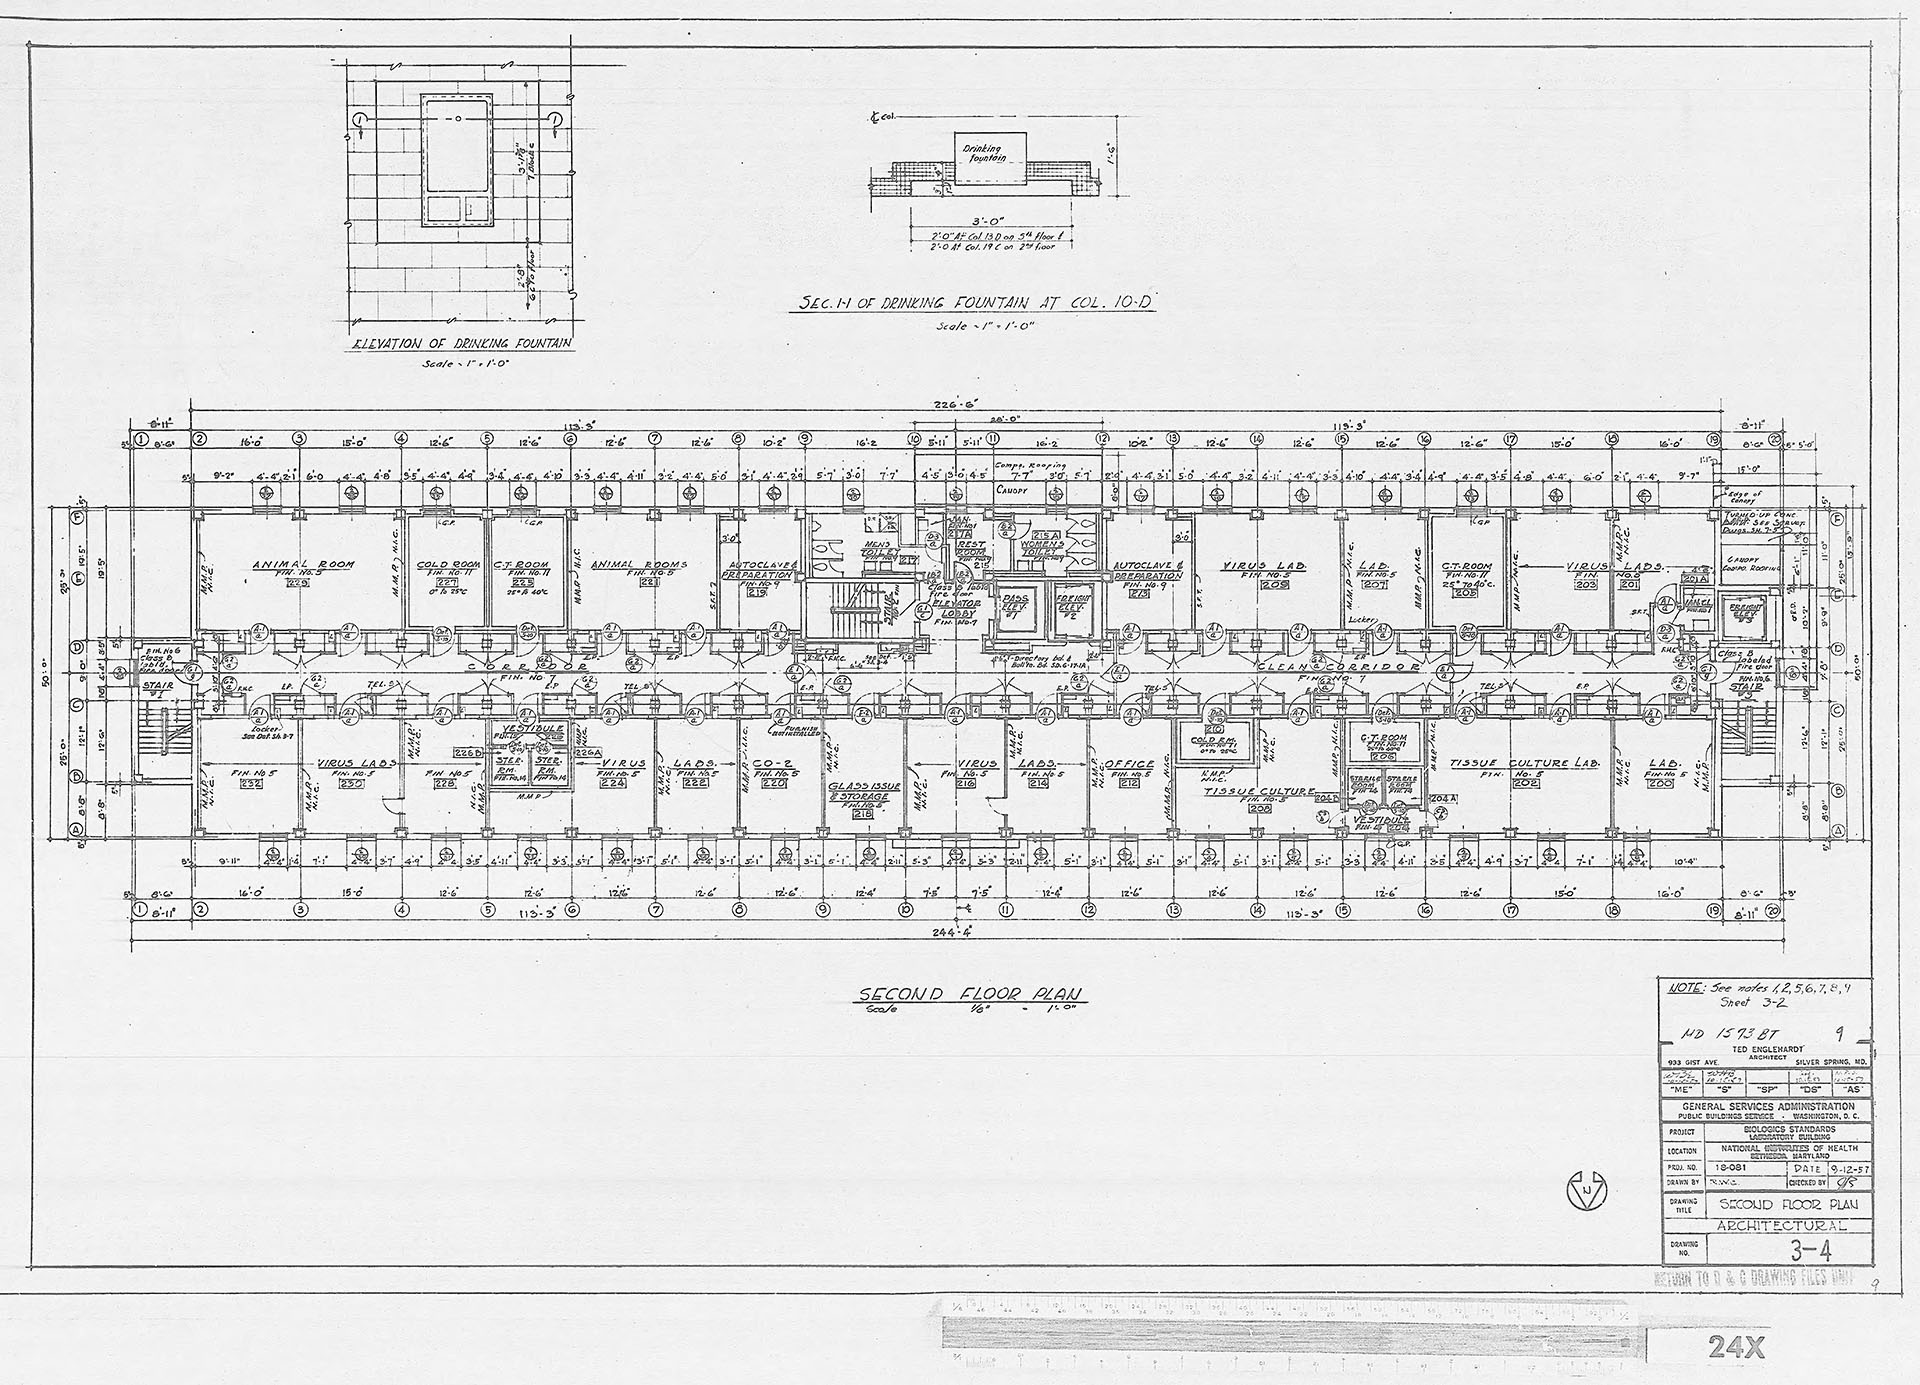 Second floor plan of Building 29, showing laboratory spaces and offices